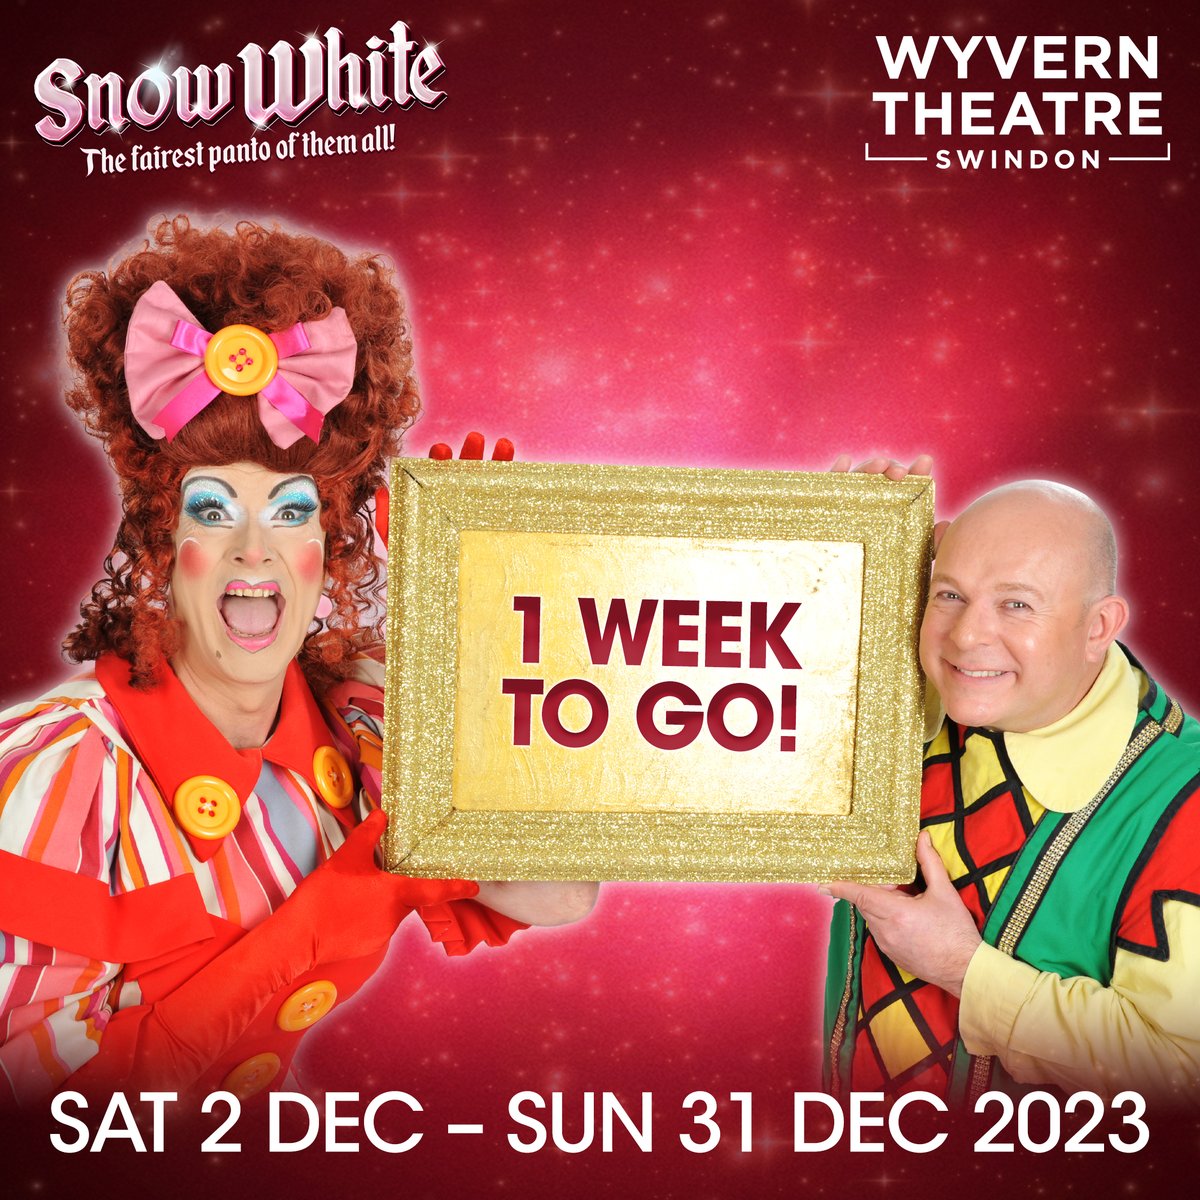 ❗One week to go?!! OH YES IT IS!! 🍎We know how much you lovely lot are looking forward to this year's panto and our fabulous cast cannot wait to get started! @DivinaDeCampo @NathanConnortv @RealPaulBurling @DavidAshley5678 @DorranceTweets